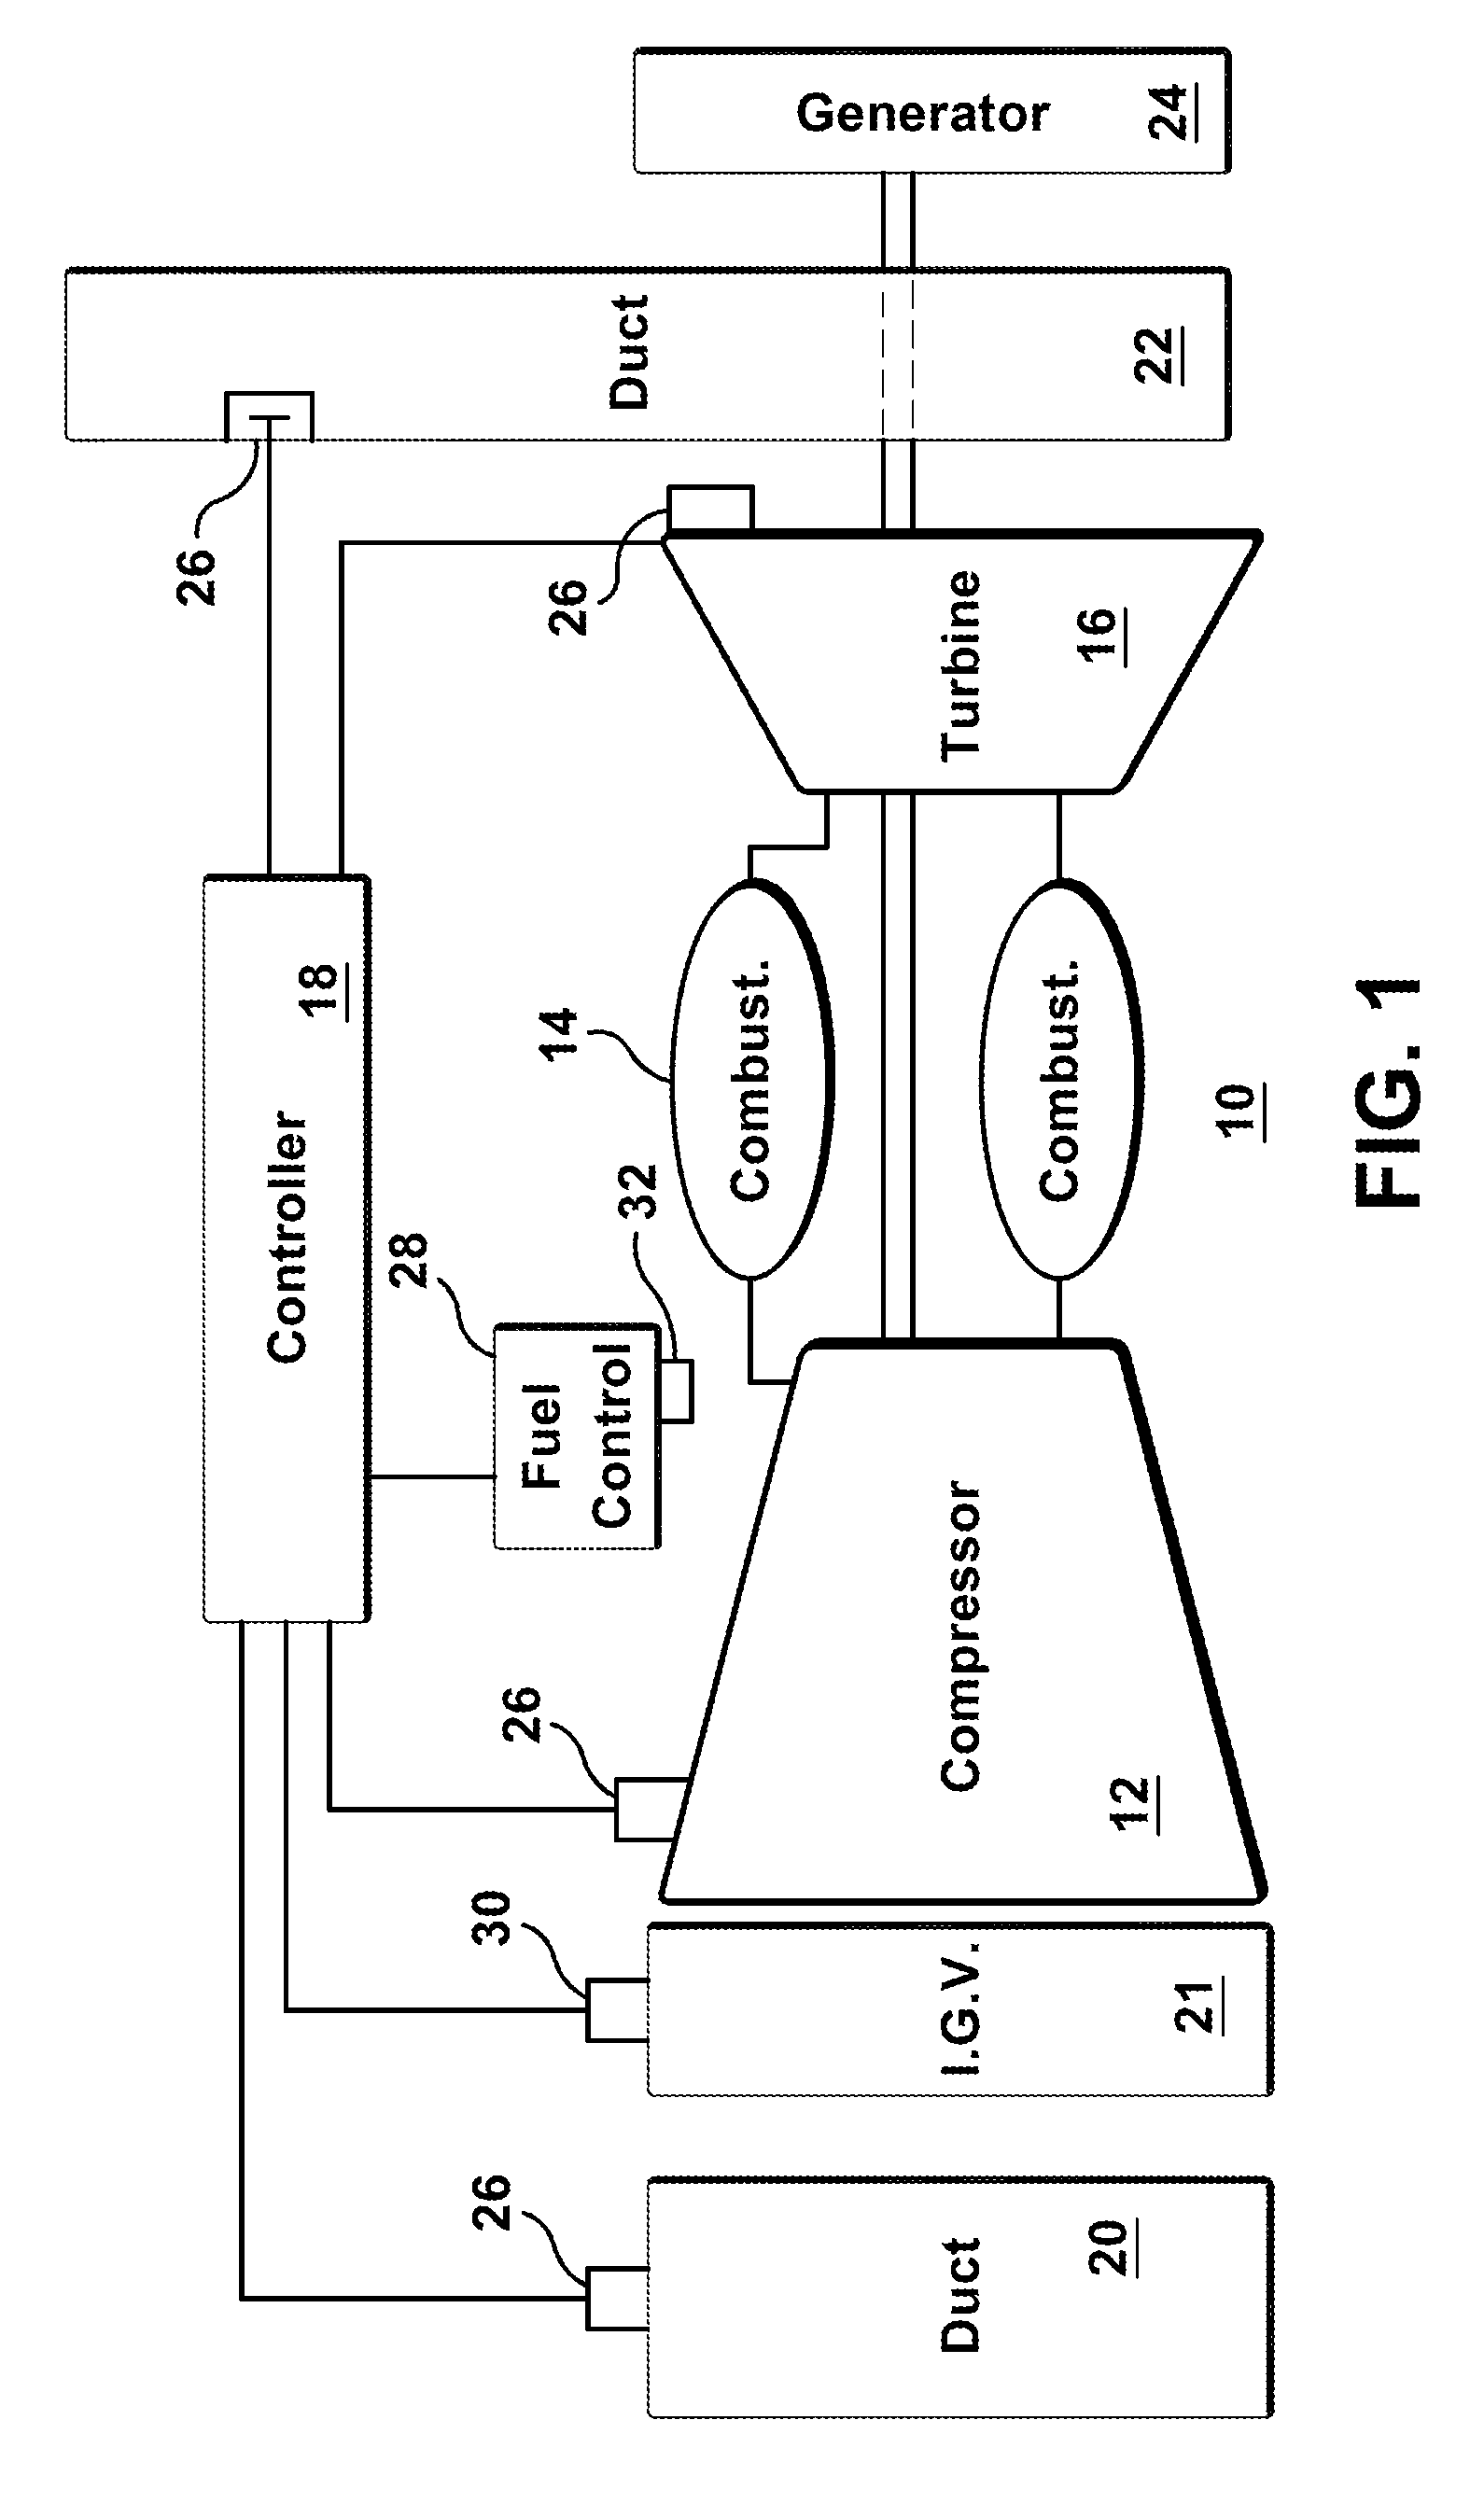 Method Of Mitigating Undesired Gas Turbine Transient Response Using Event Based Actions